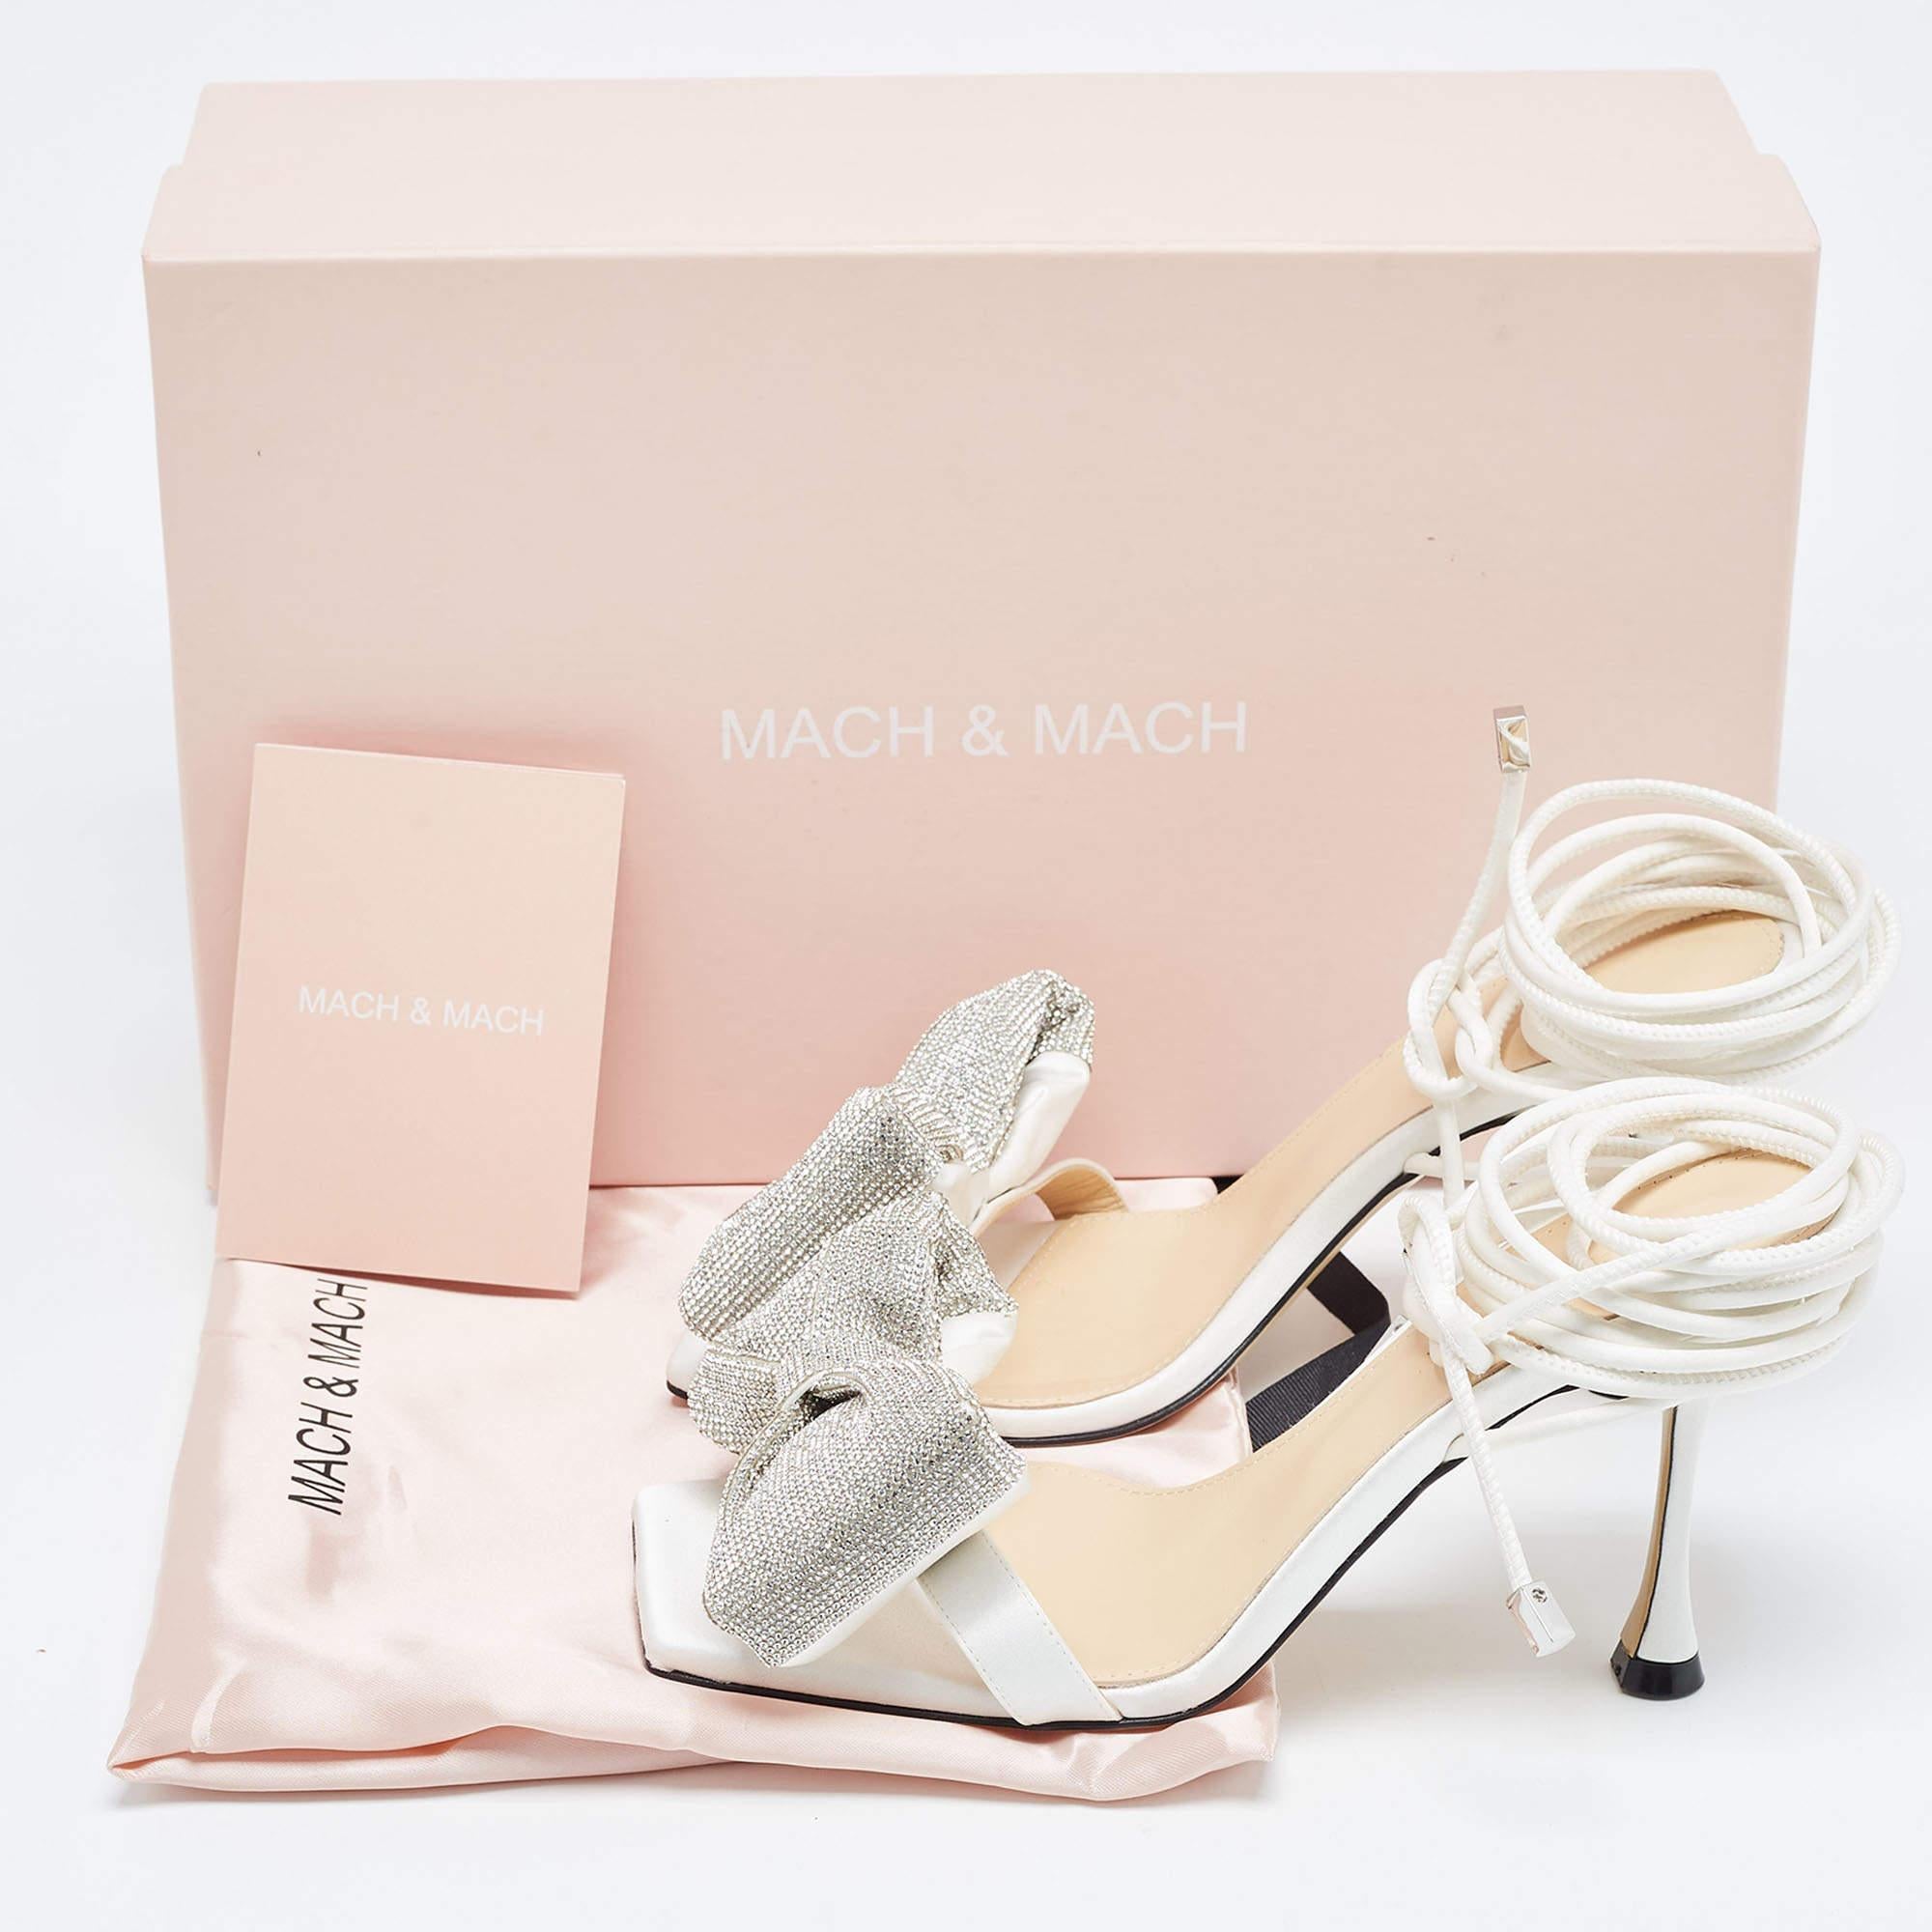 Mach & Mach White Satin Crystal Embellished Bow Ankle Wrap Sandals Size 38 2